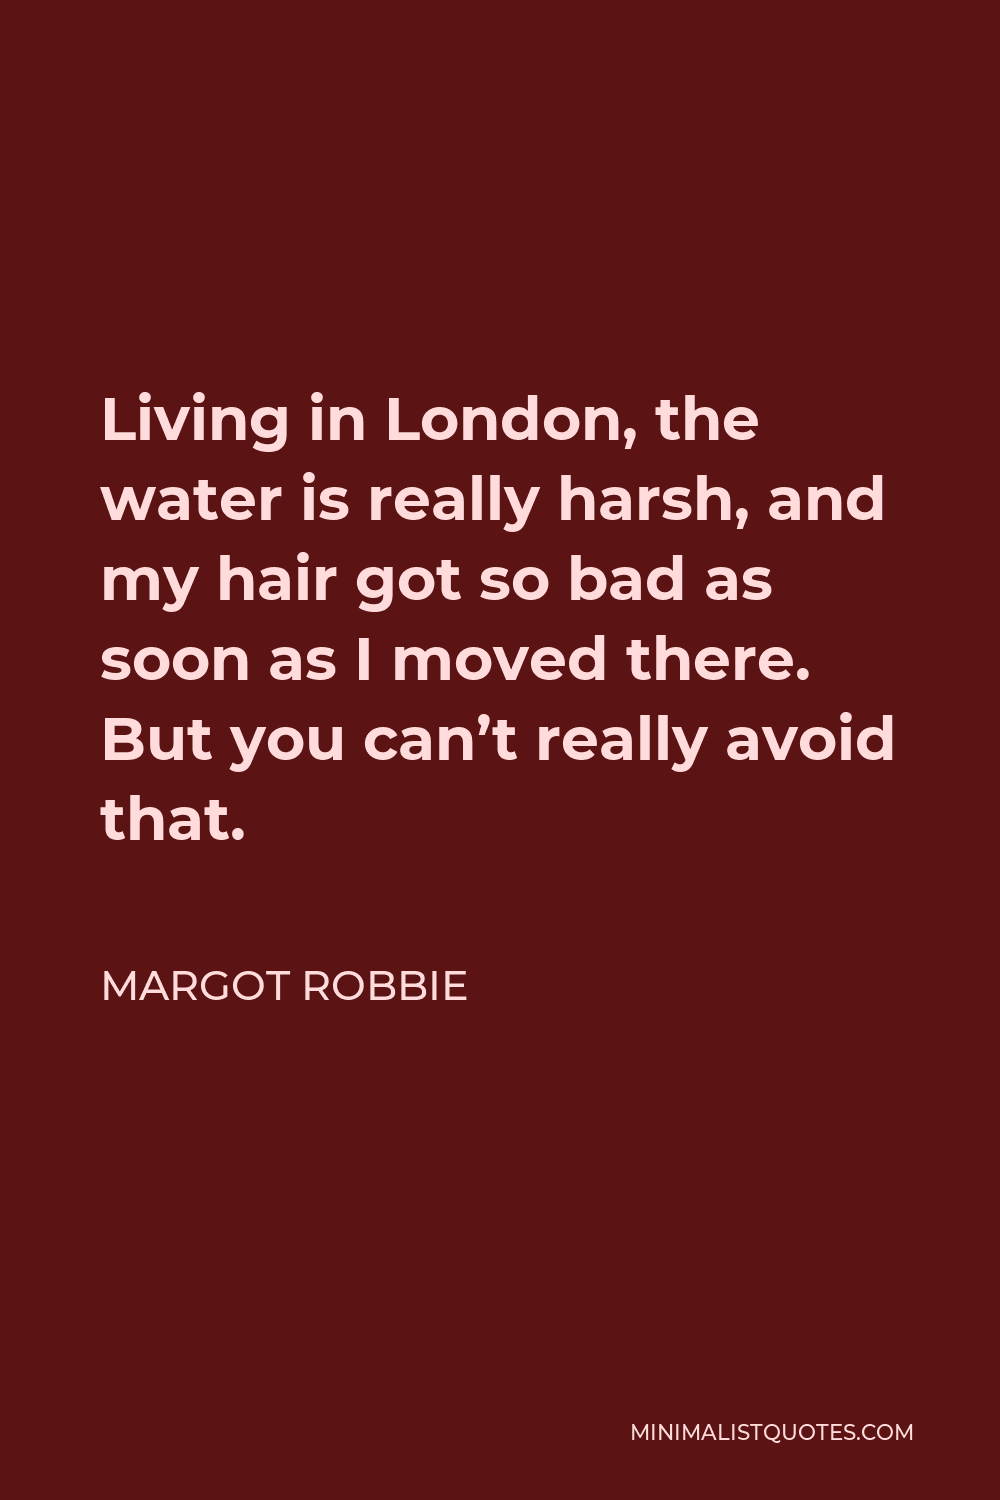 Margot Robbie Quote - Living in London, the water is really harsh, and my hair got so bad as soon as I moved there. But you can’t really avoid that.